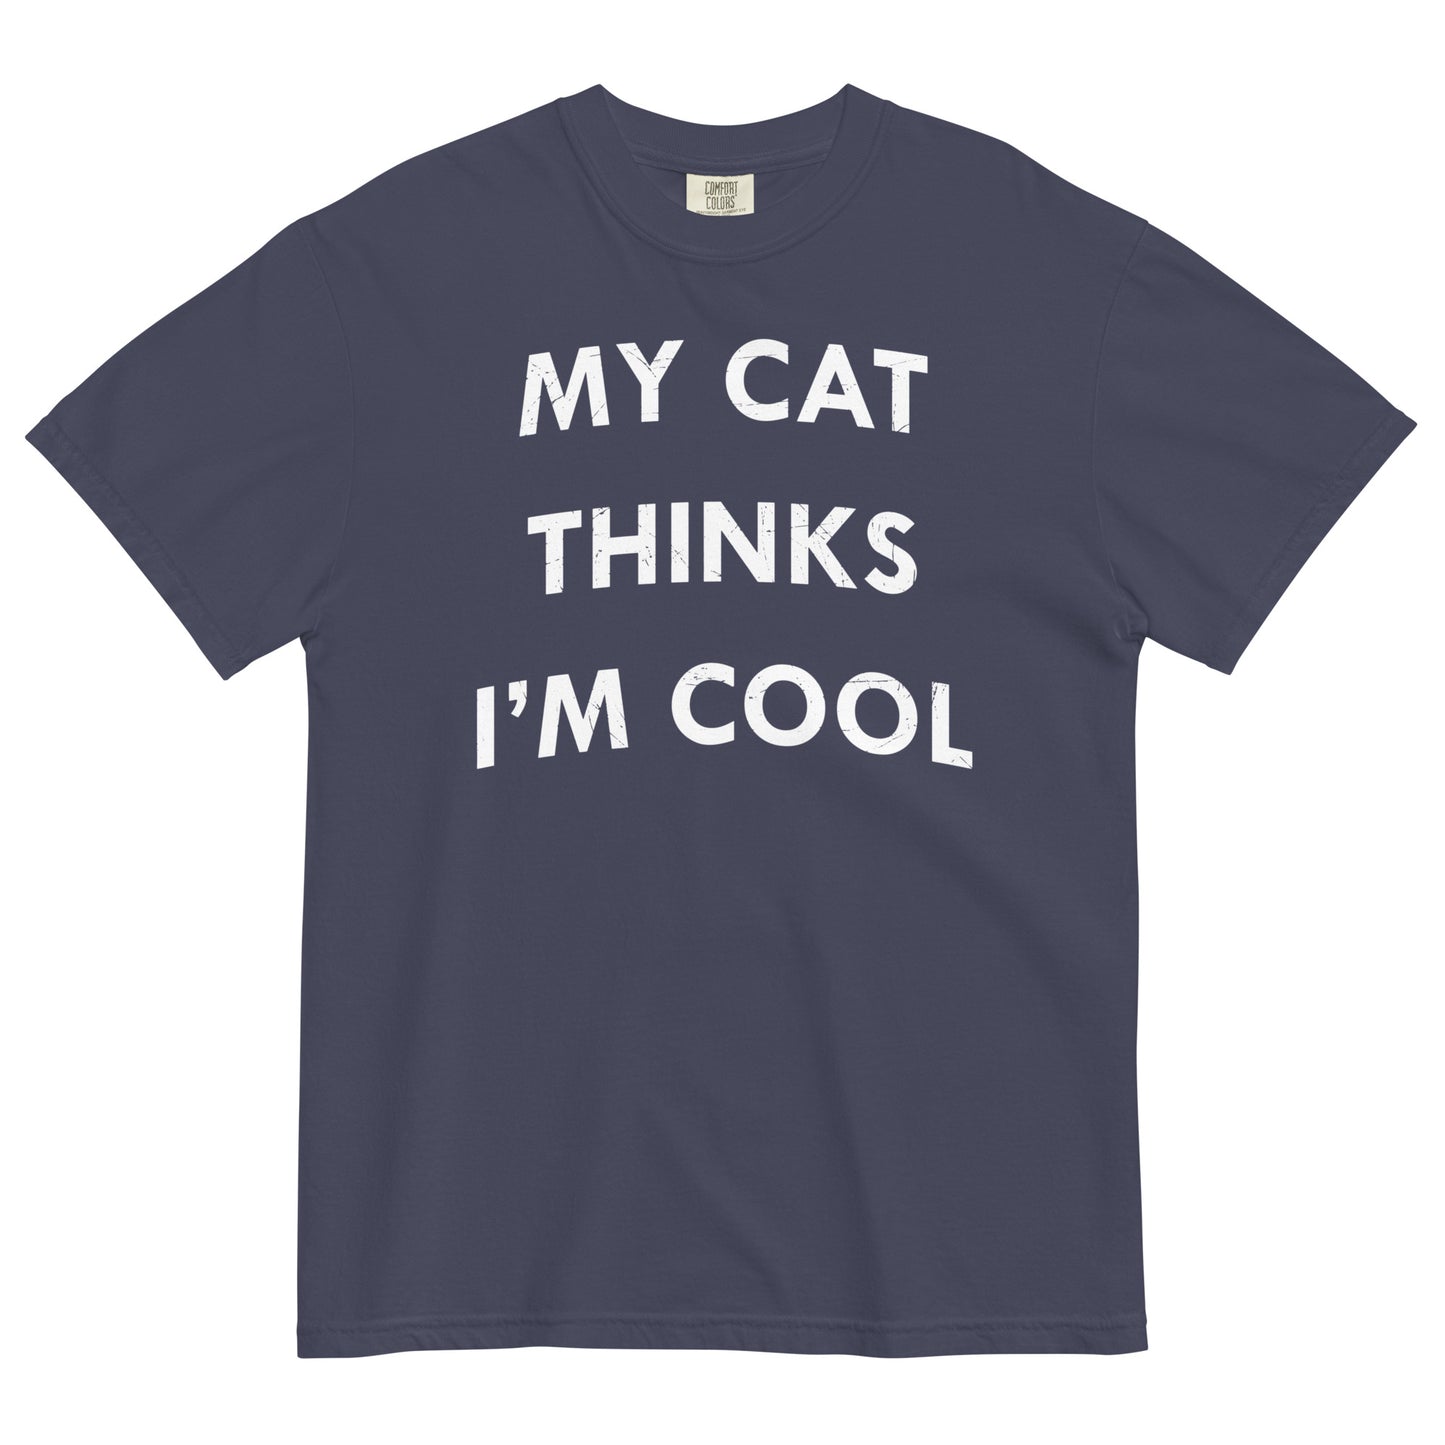 My Cat Thinks I'm Cool Men's Relaxed Fit Tee